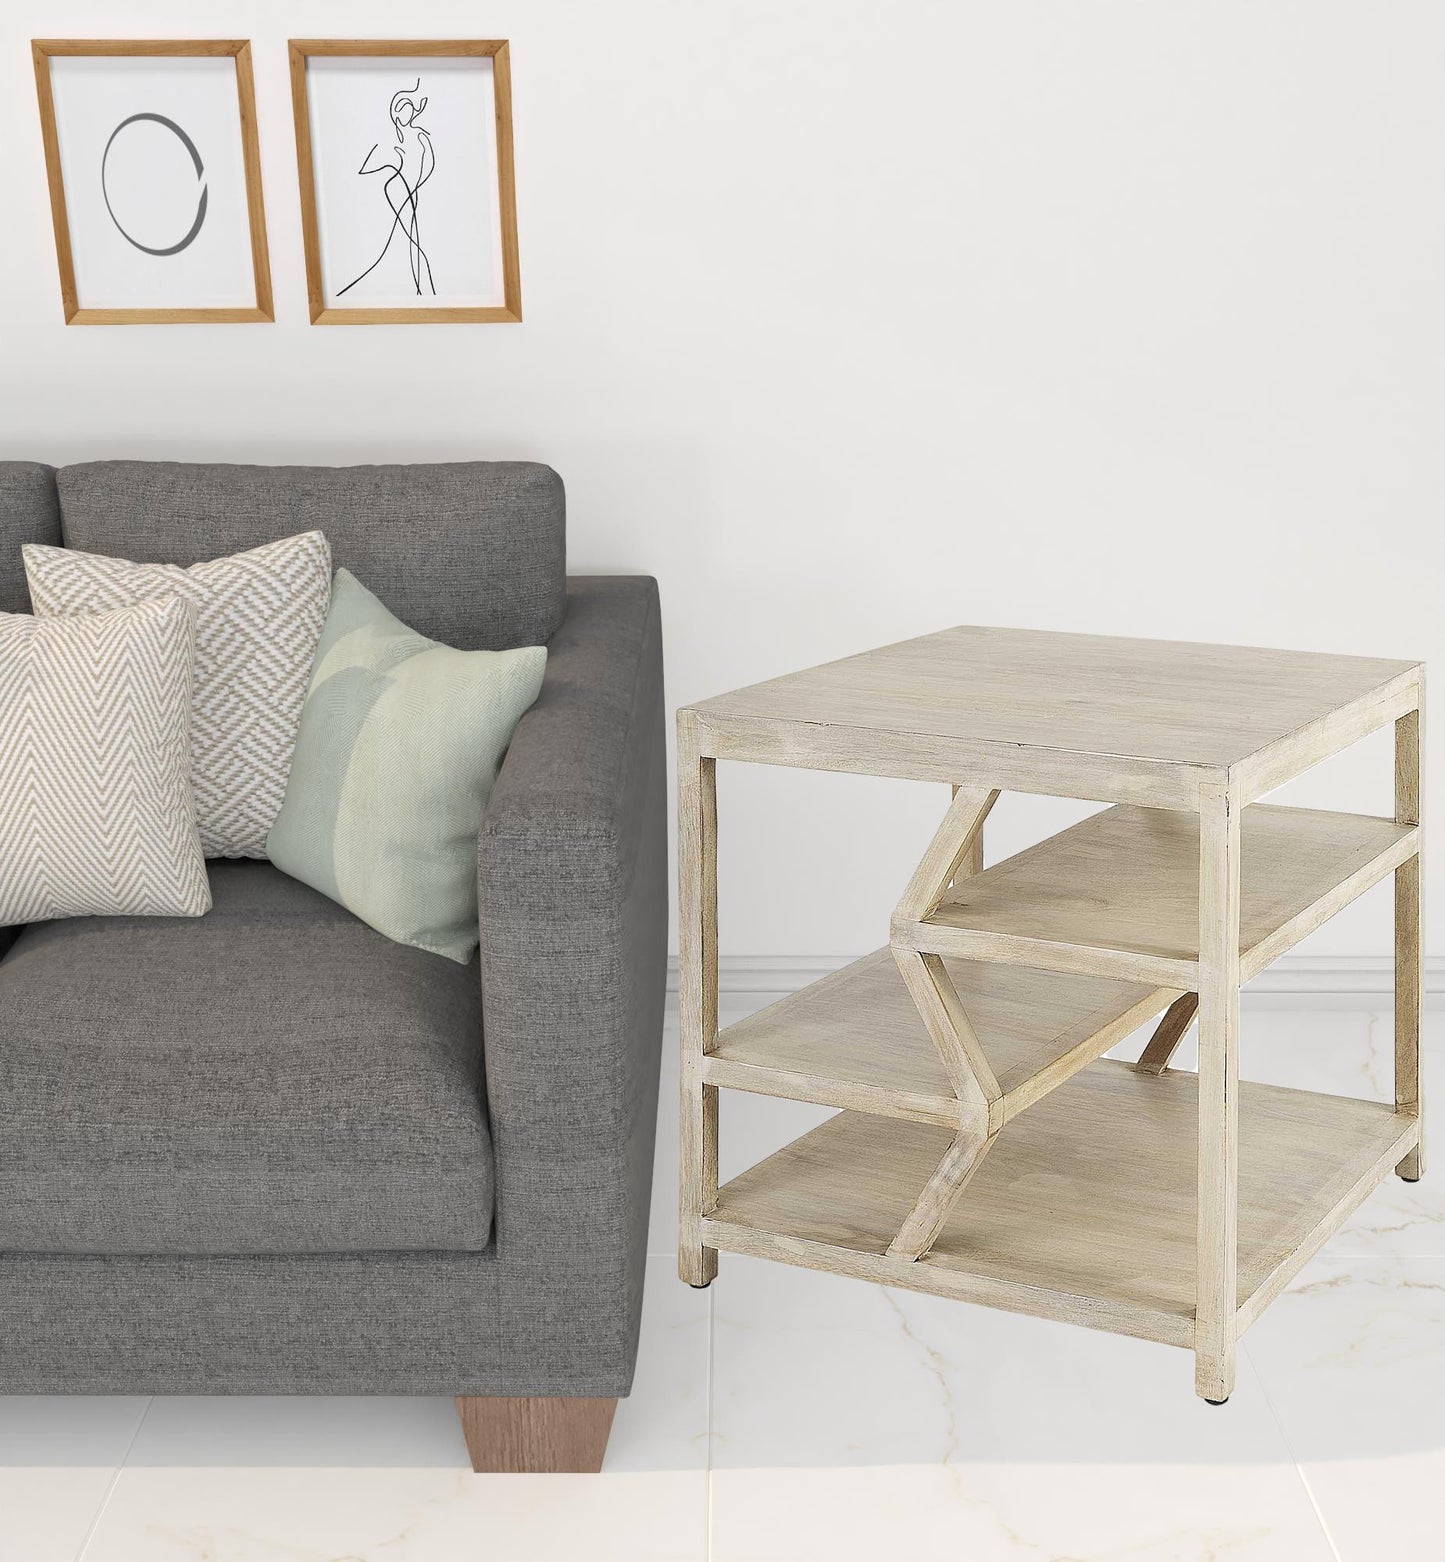 Light Brown Wooden Square Top Side Table With Multi-Level Shelf